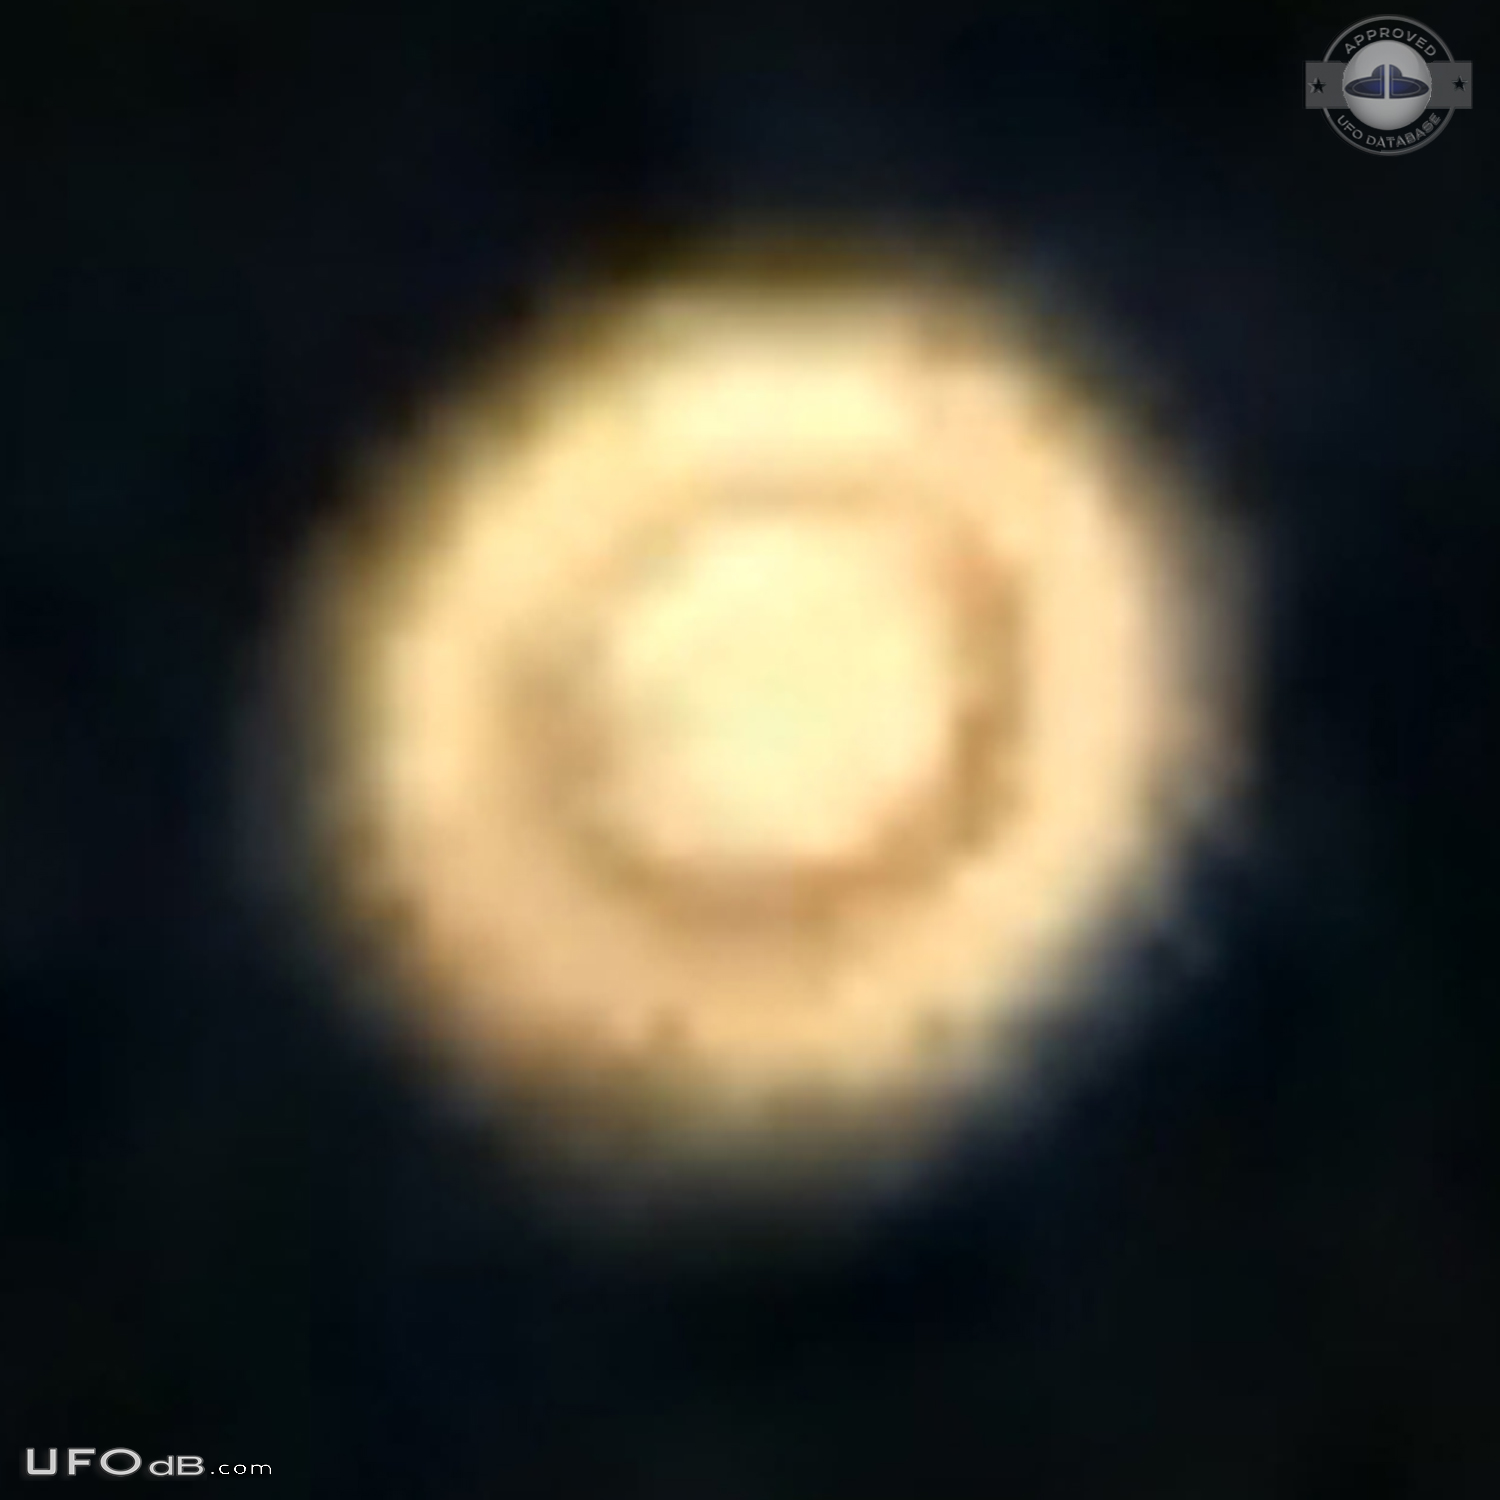 Bright orange planet like UFO stationary then moved Indiana USA 2017 UFO Picture #802-4